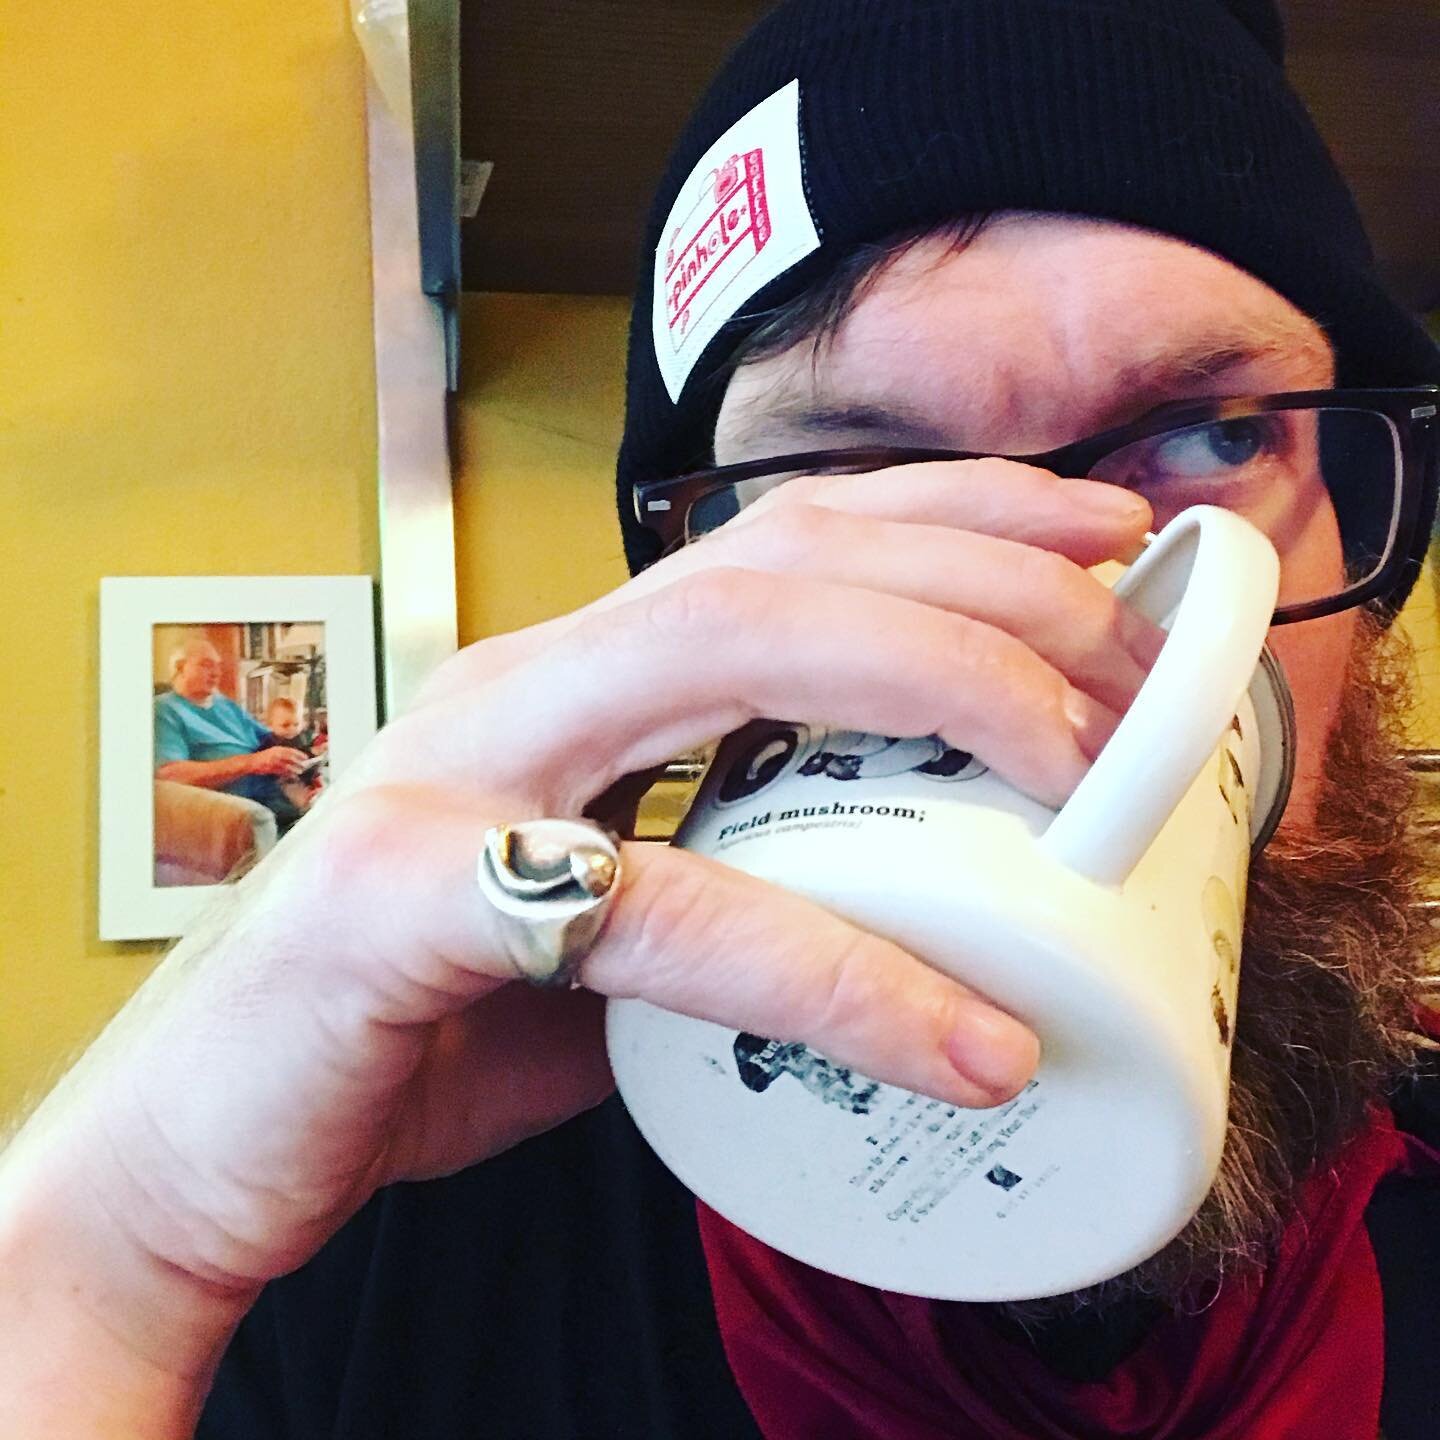 #support #smallbusiness #sba repping my good friends @pinholecoffee beanie this morning while I sipped one of their signature blends I hide in the freezer for cold days like today 🥶 🌉 🍄❤️✌️
&bull;
&bull;
&bull;
&bull;
&bull;
&bull;
&bull;
&bull;
&